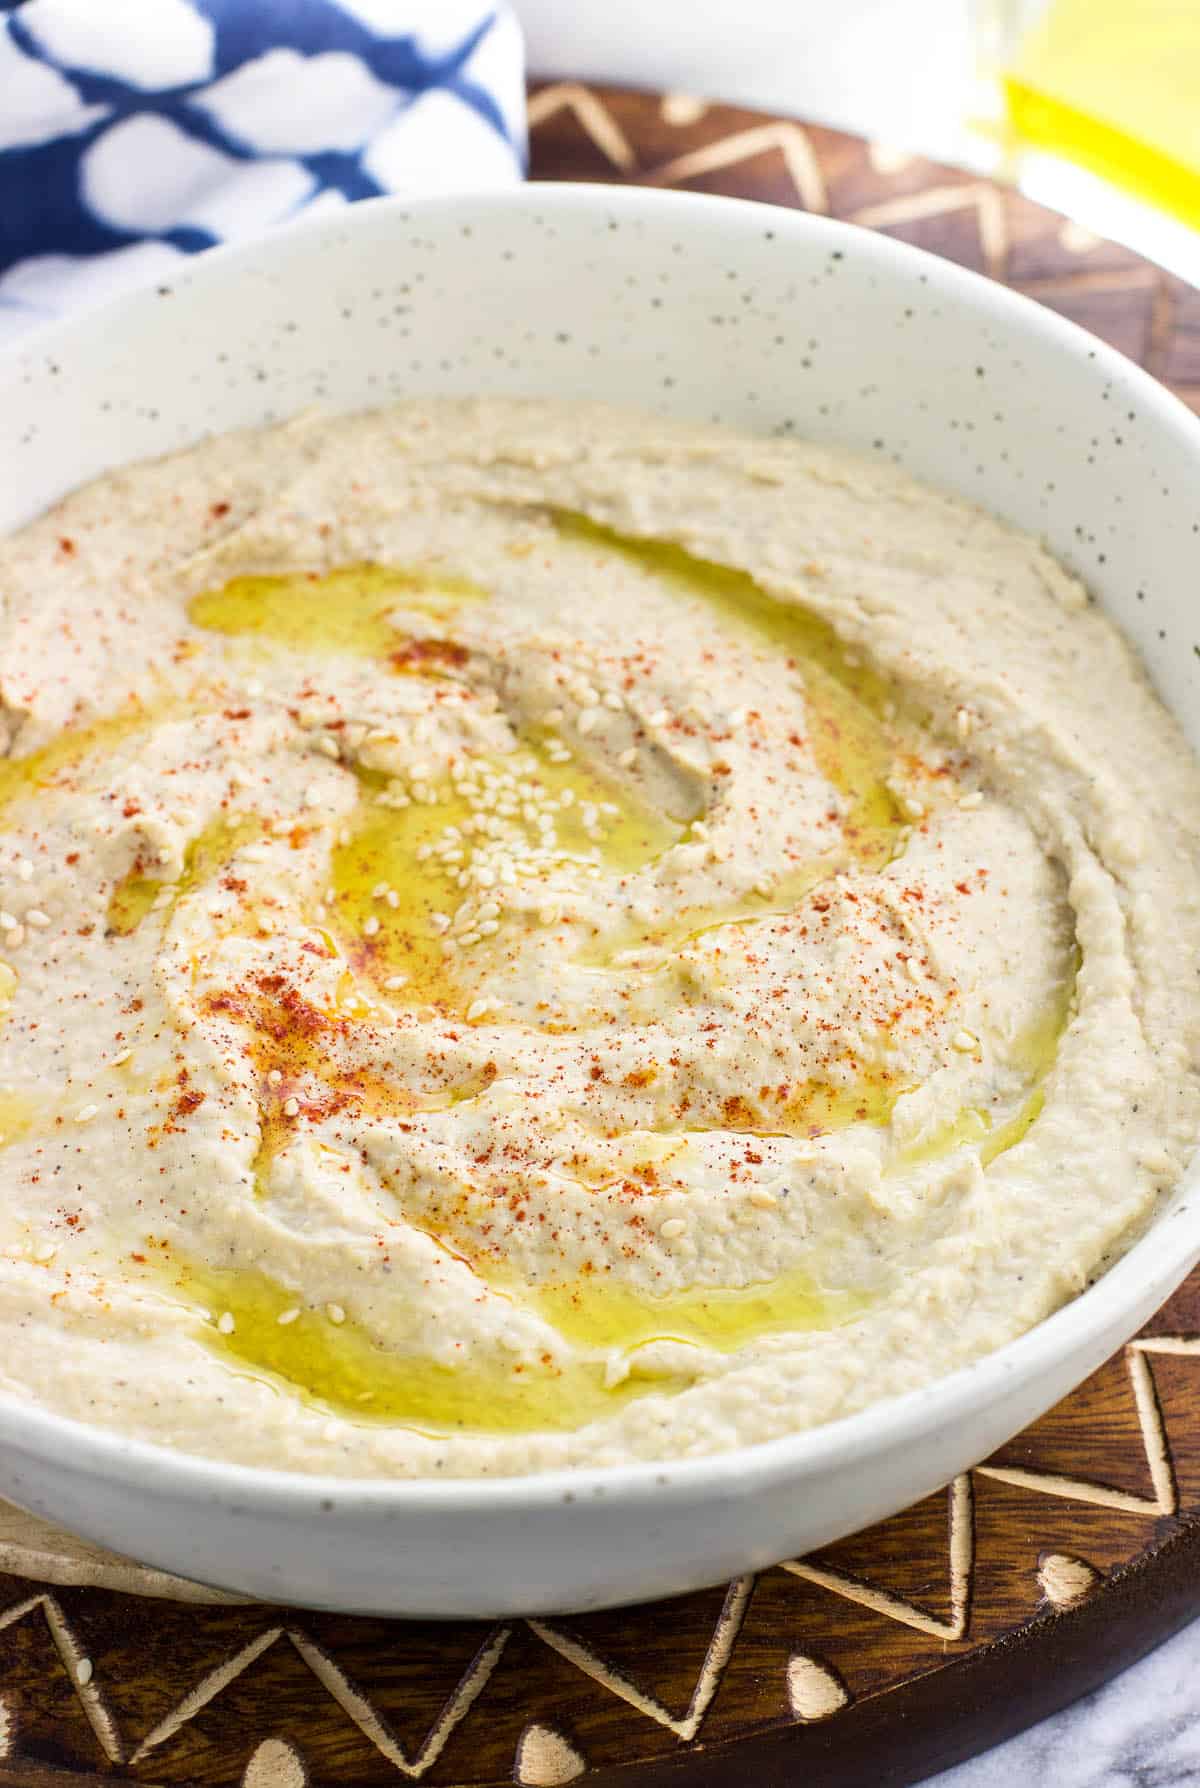 A serving bowl of hummus with olive oil, paprika, and sesame seeds.